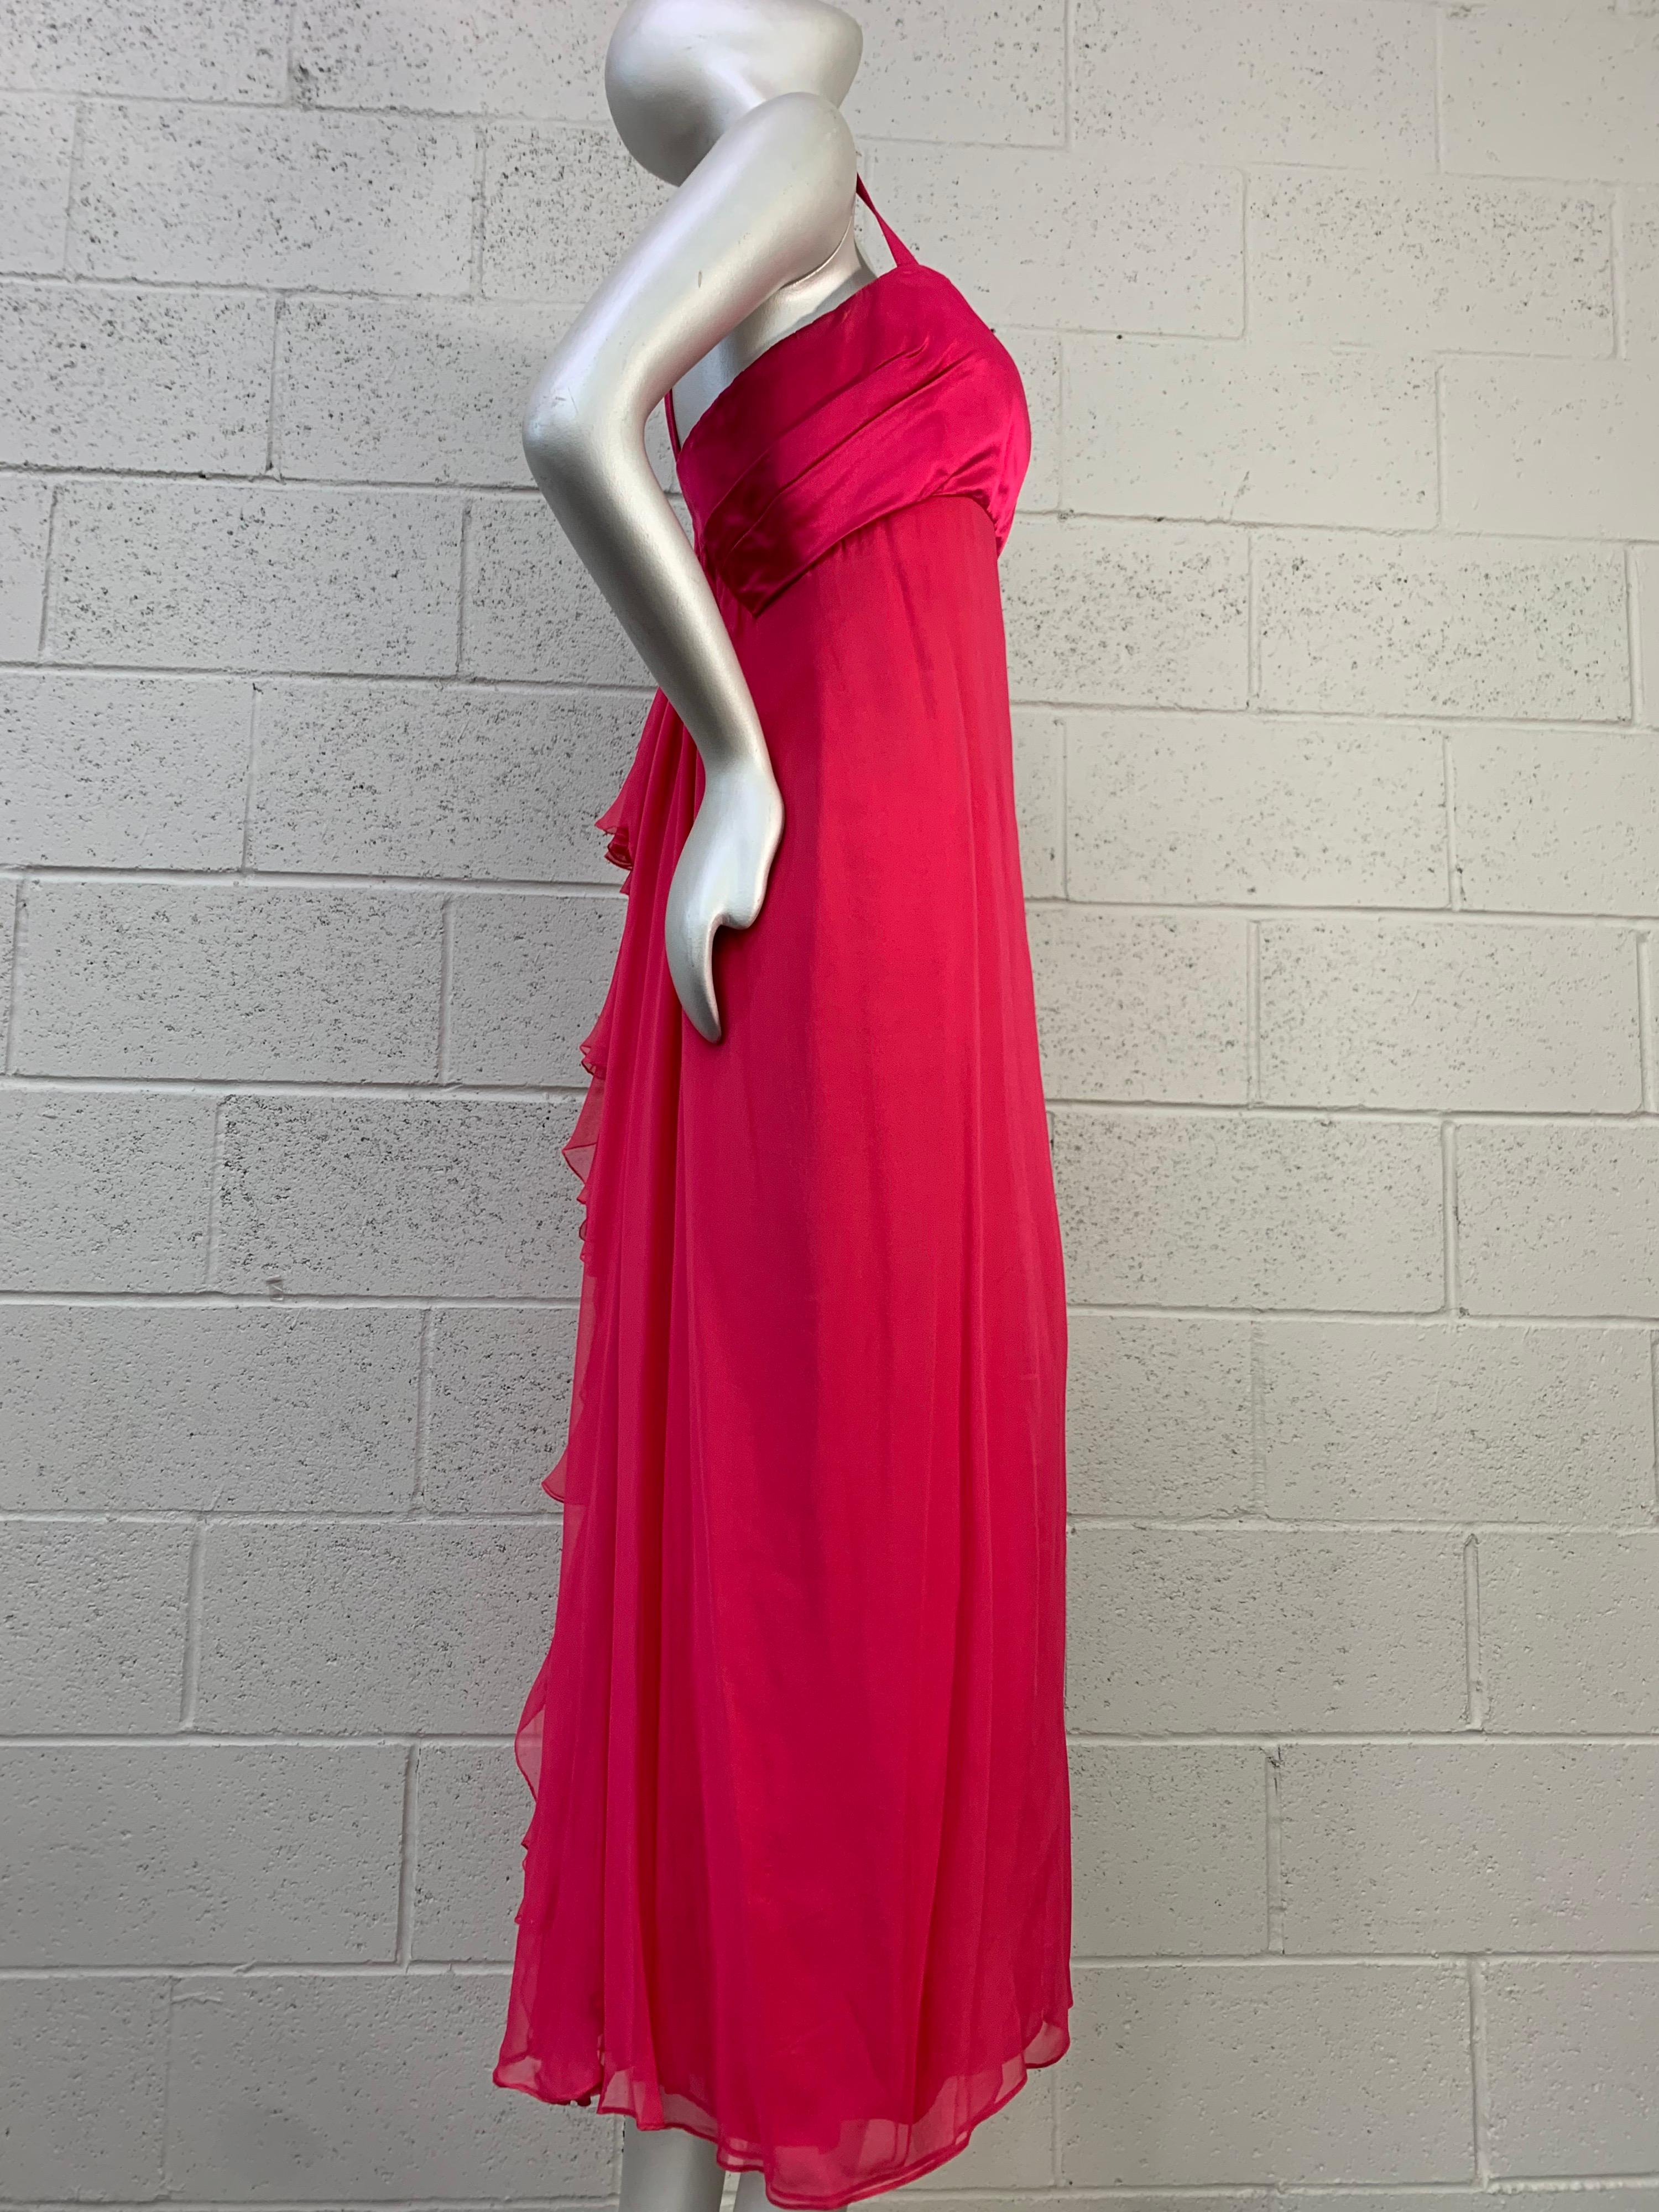 1960 Helena Barbieri Shocking Pink Silk Chiffon Column Gown w/ Waterfall Back: Double layer silk chiffon with silk satin bodice. Crepe fitted sheath skirt. Unstructured. Fully lined. Size 6. 